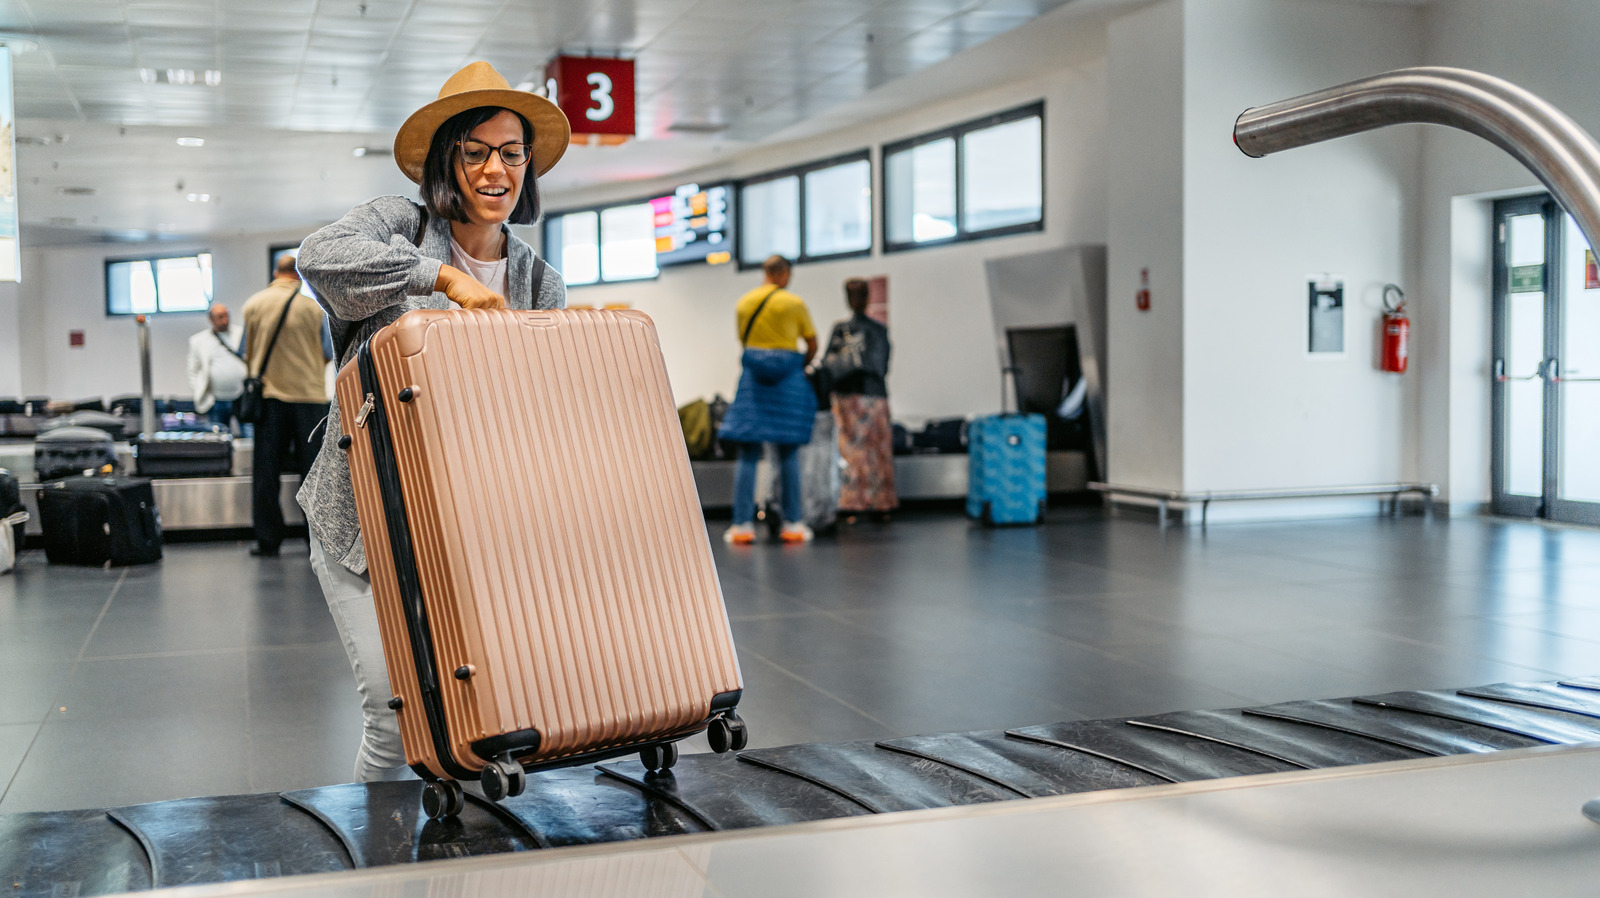 The Easy Hack For Keeping Your Checked Luggage Safe May Be Too Good To Be True – Explore